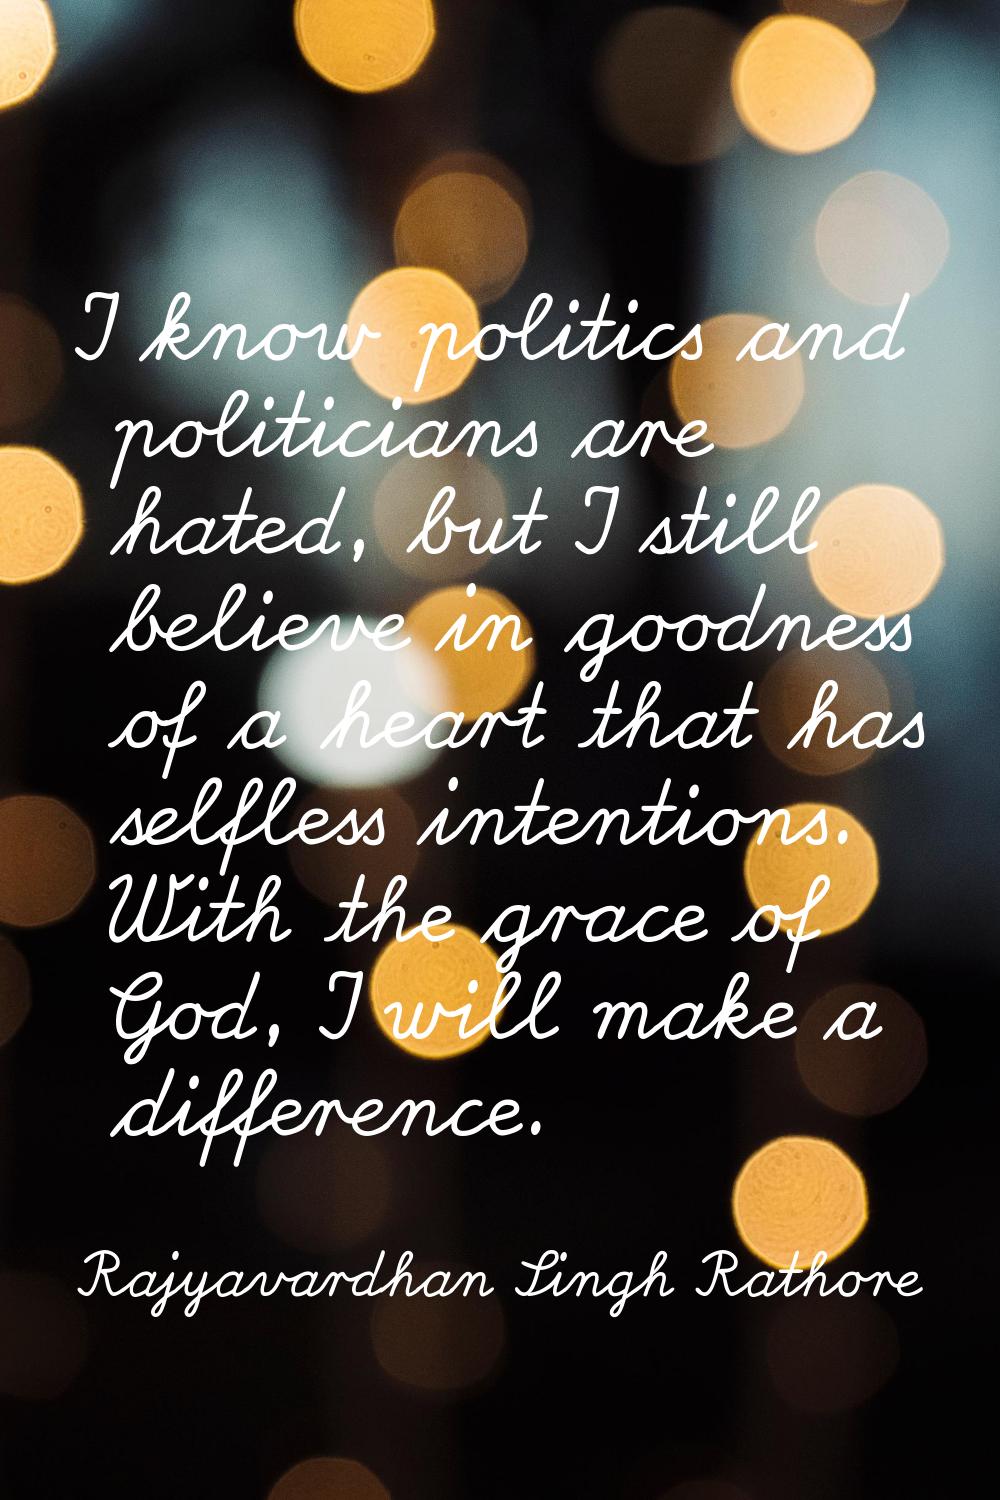 I know politics and politicians are hated, but I still believe in goodness of a heart that has self